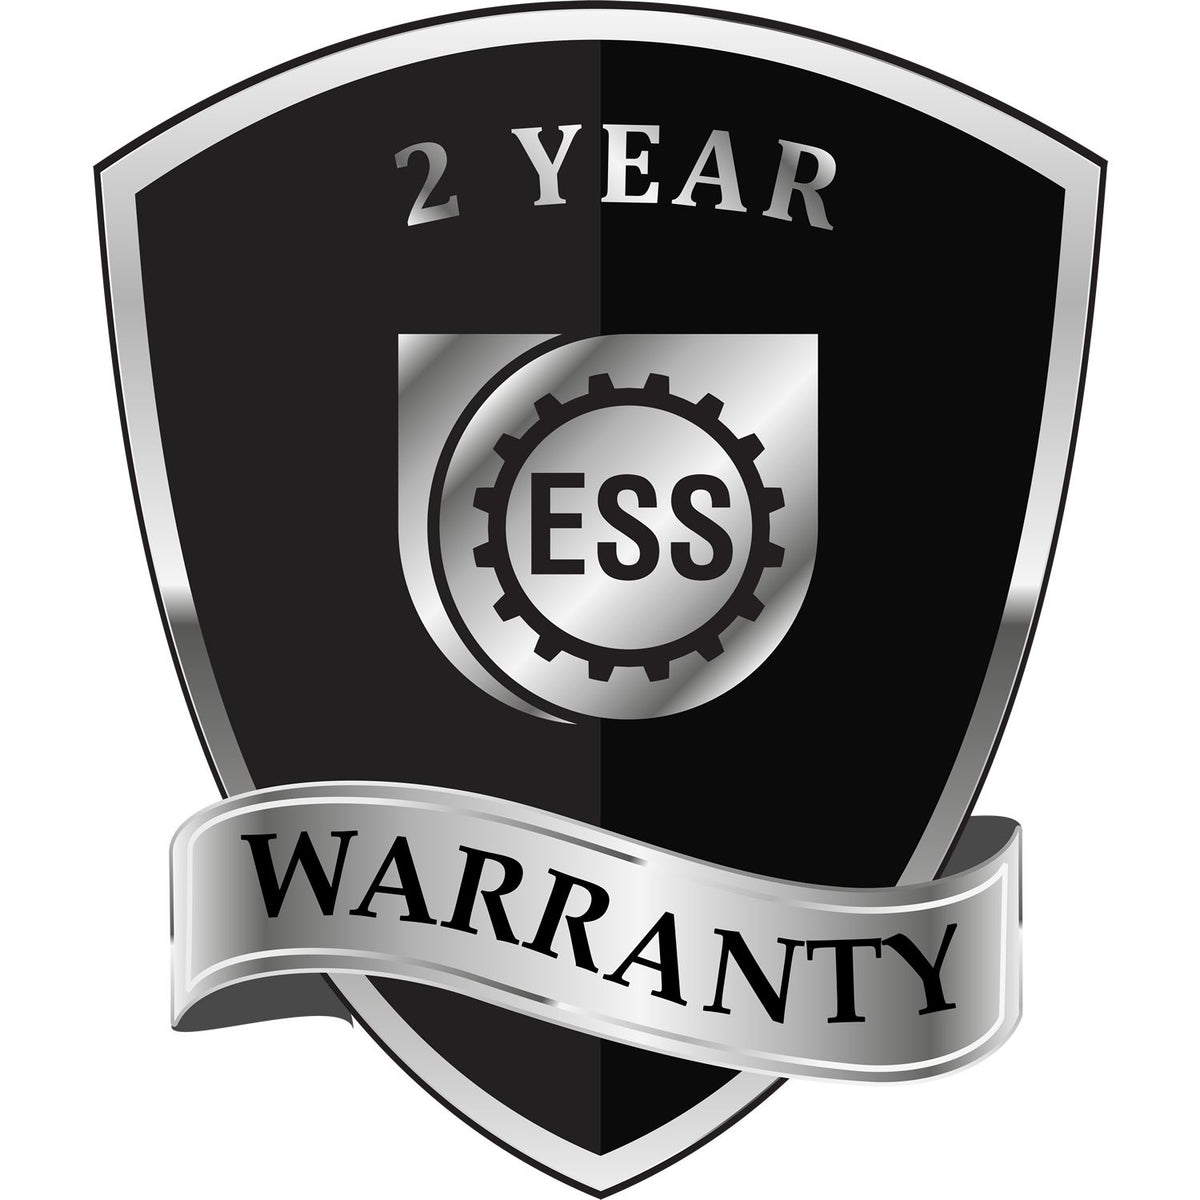 A black and silver badge or emblem showing warranty information for the Heavy Duty Cast Iron Ohio Geologist Seal Embosser